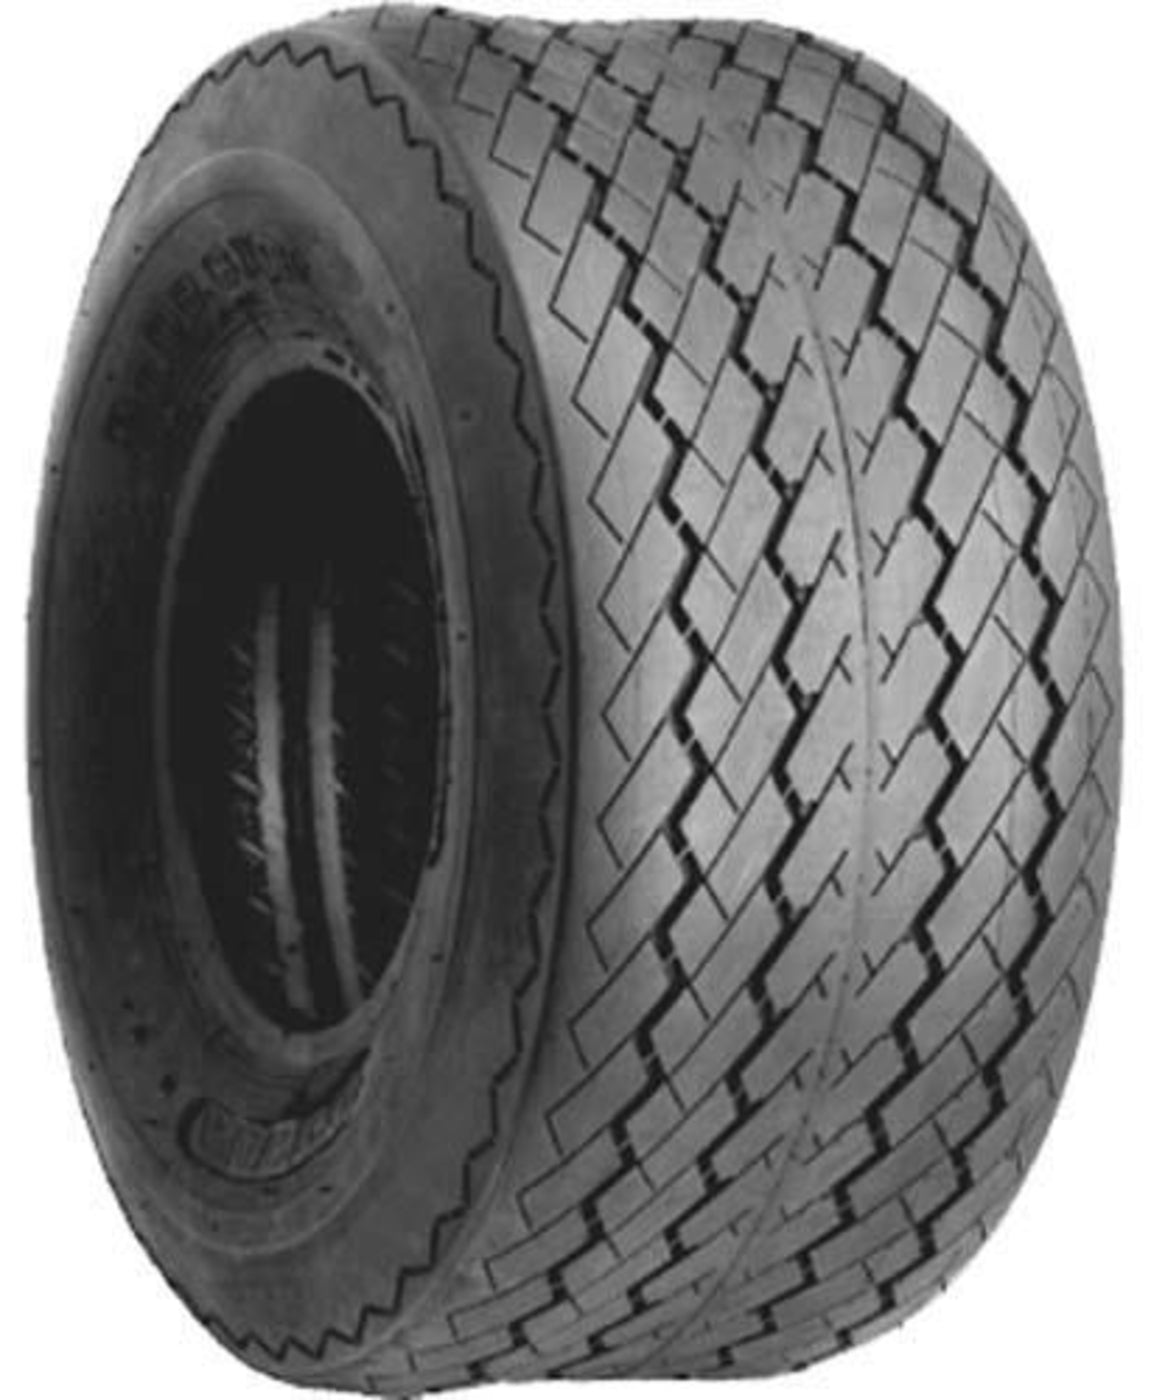 18x8.50-8 Golf Pro Plus Tire DOT (No Lift Required)